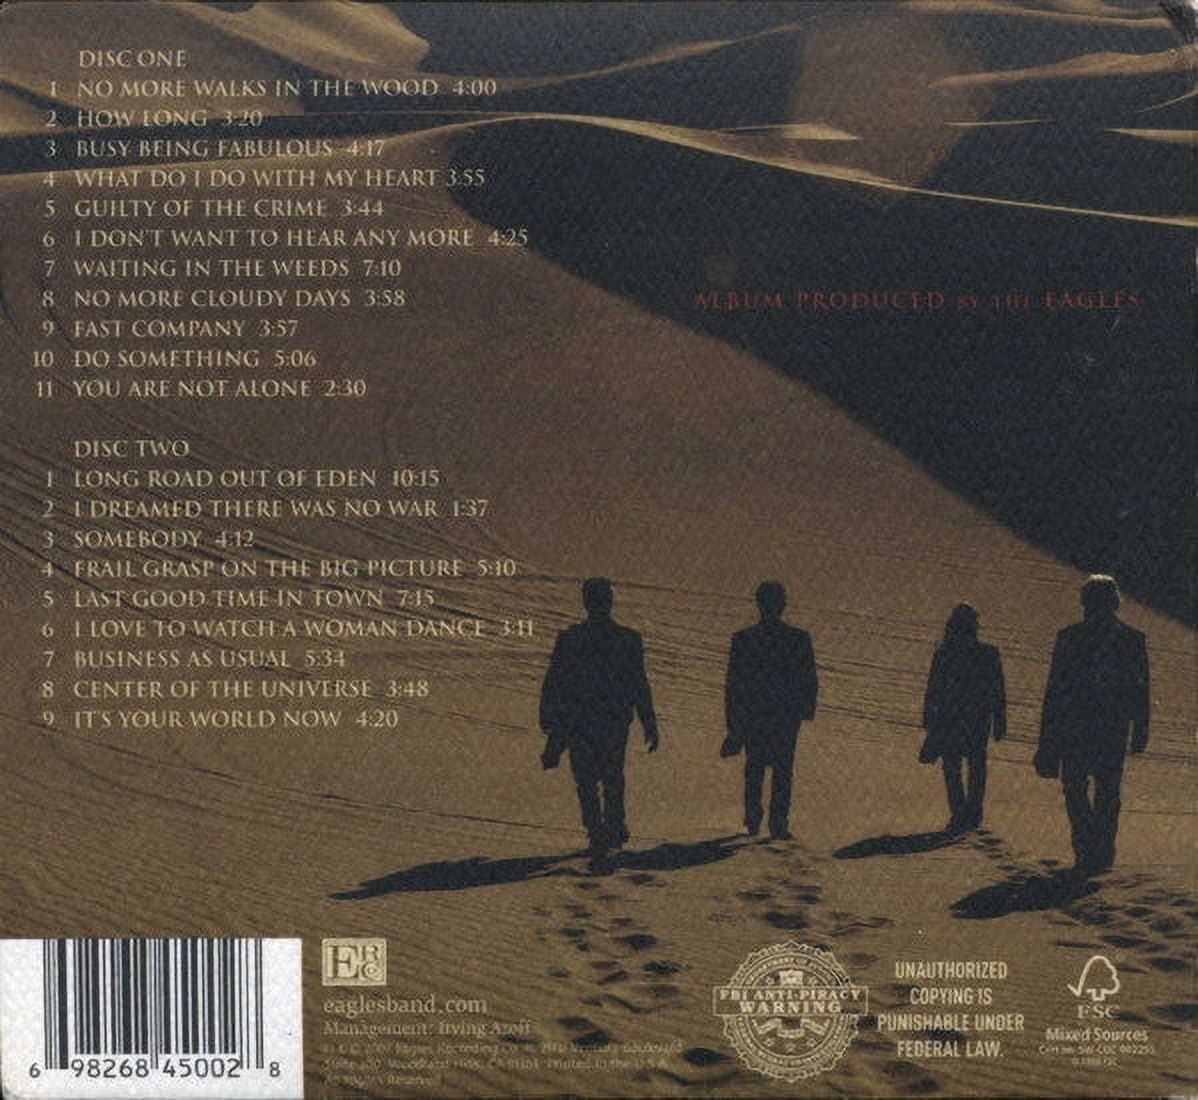 Long Road Out Of Eden Walmart Exclusive (CD), 2 Pack - image 3 of 5